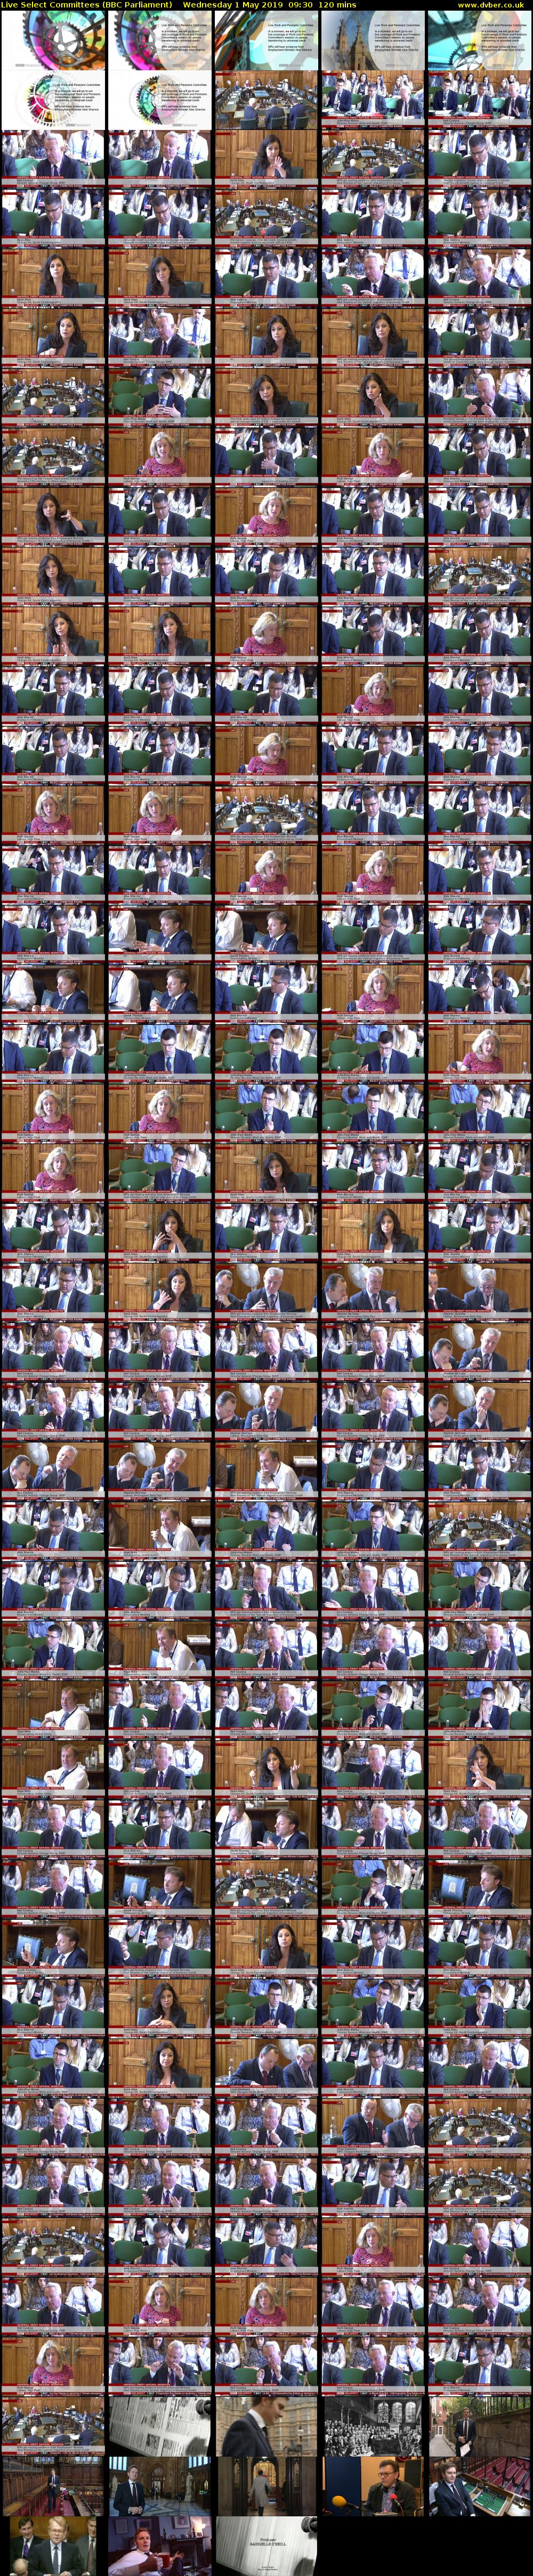 Live Select Committees (BBC Parliament) Wednesday 1 May 2019 09:30 - 11:30